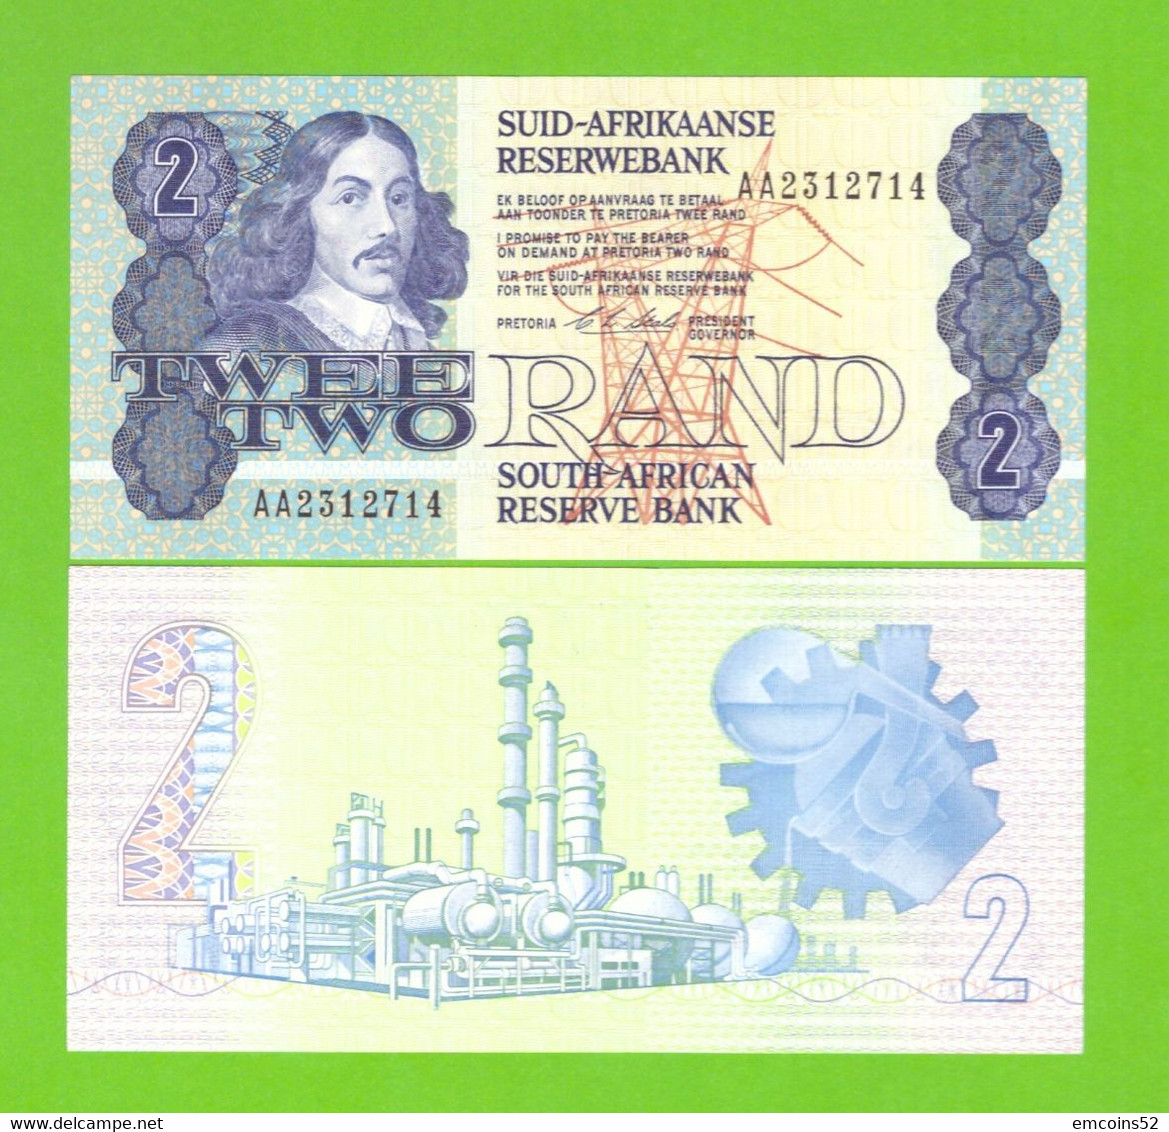 SOUTH AFRICA 2 RAND 1978/1980 P-118e UNC - South Africa